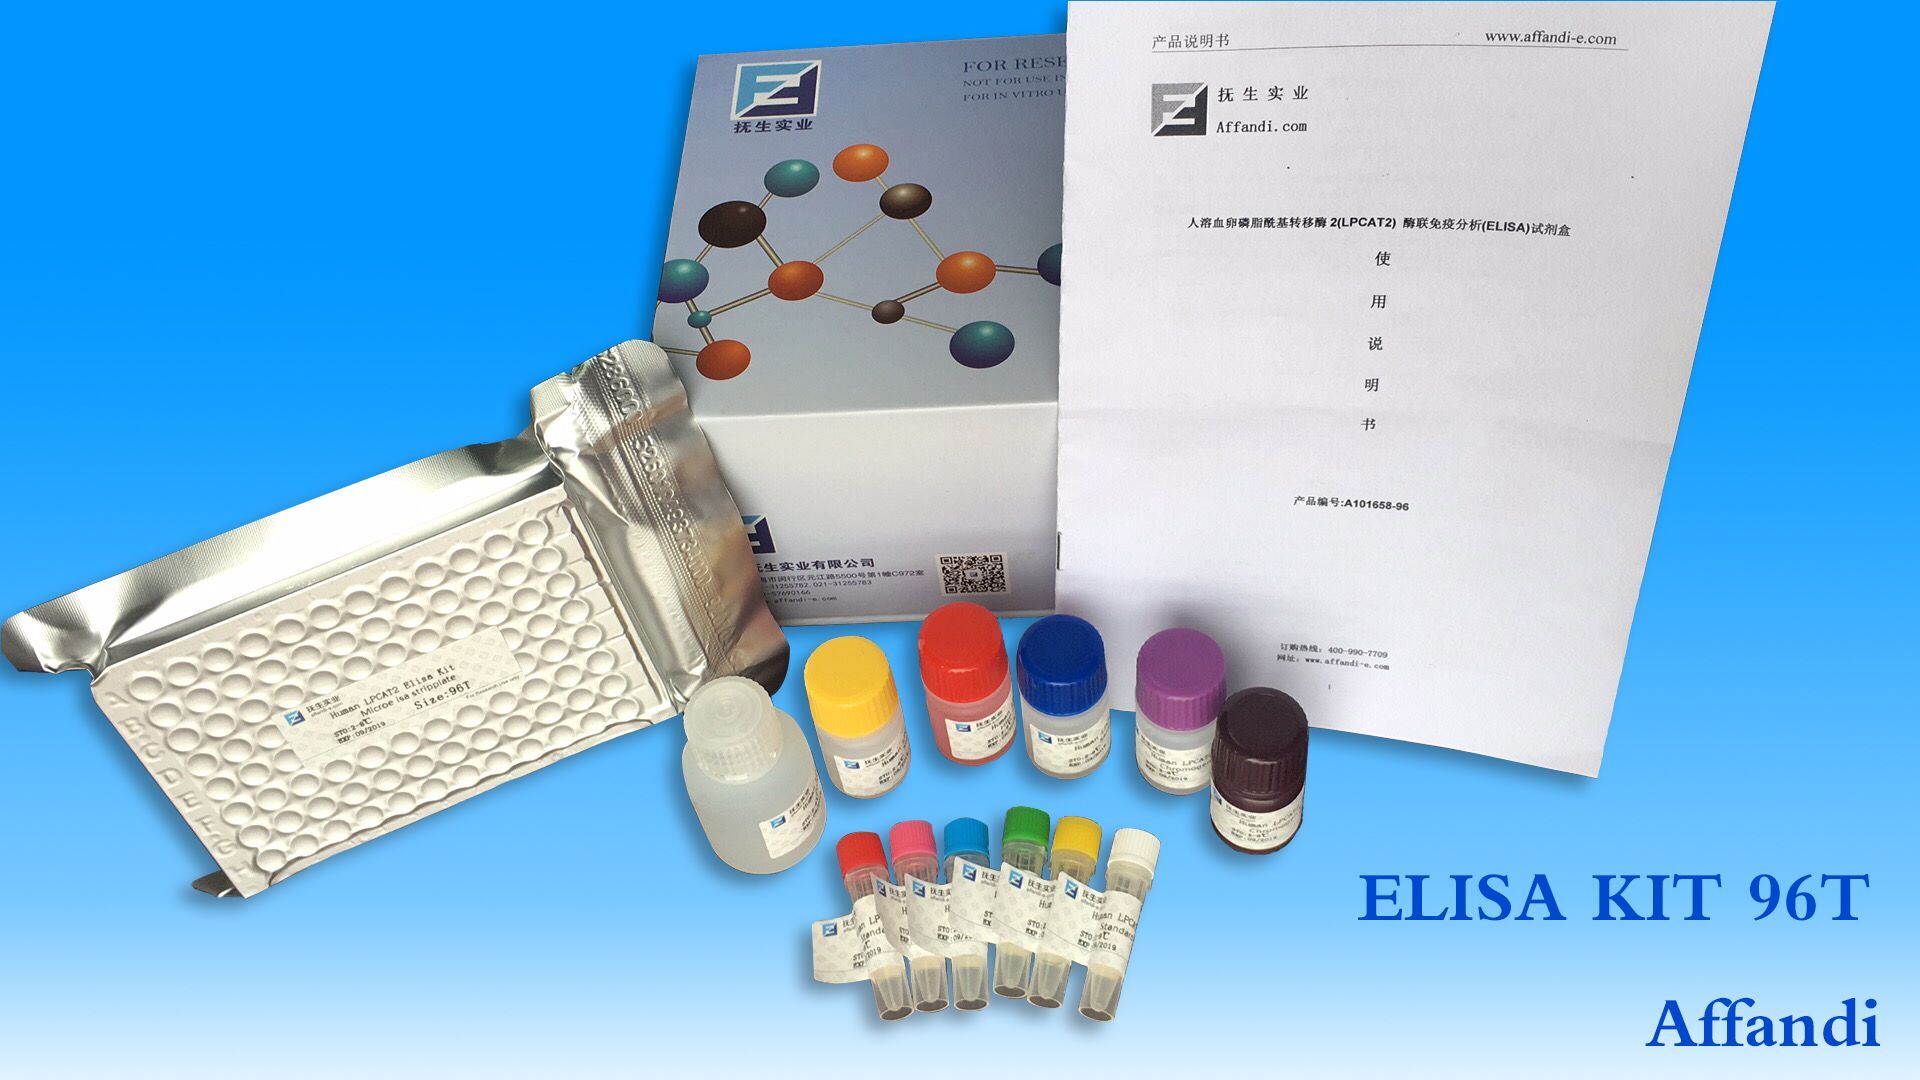 FOR Microtubule-associated proteins 1A/1B light chain 3A ELISA Kit